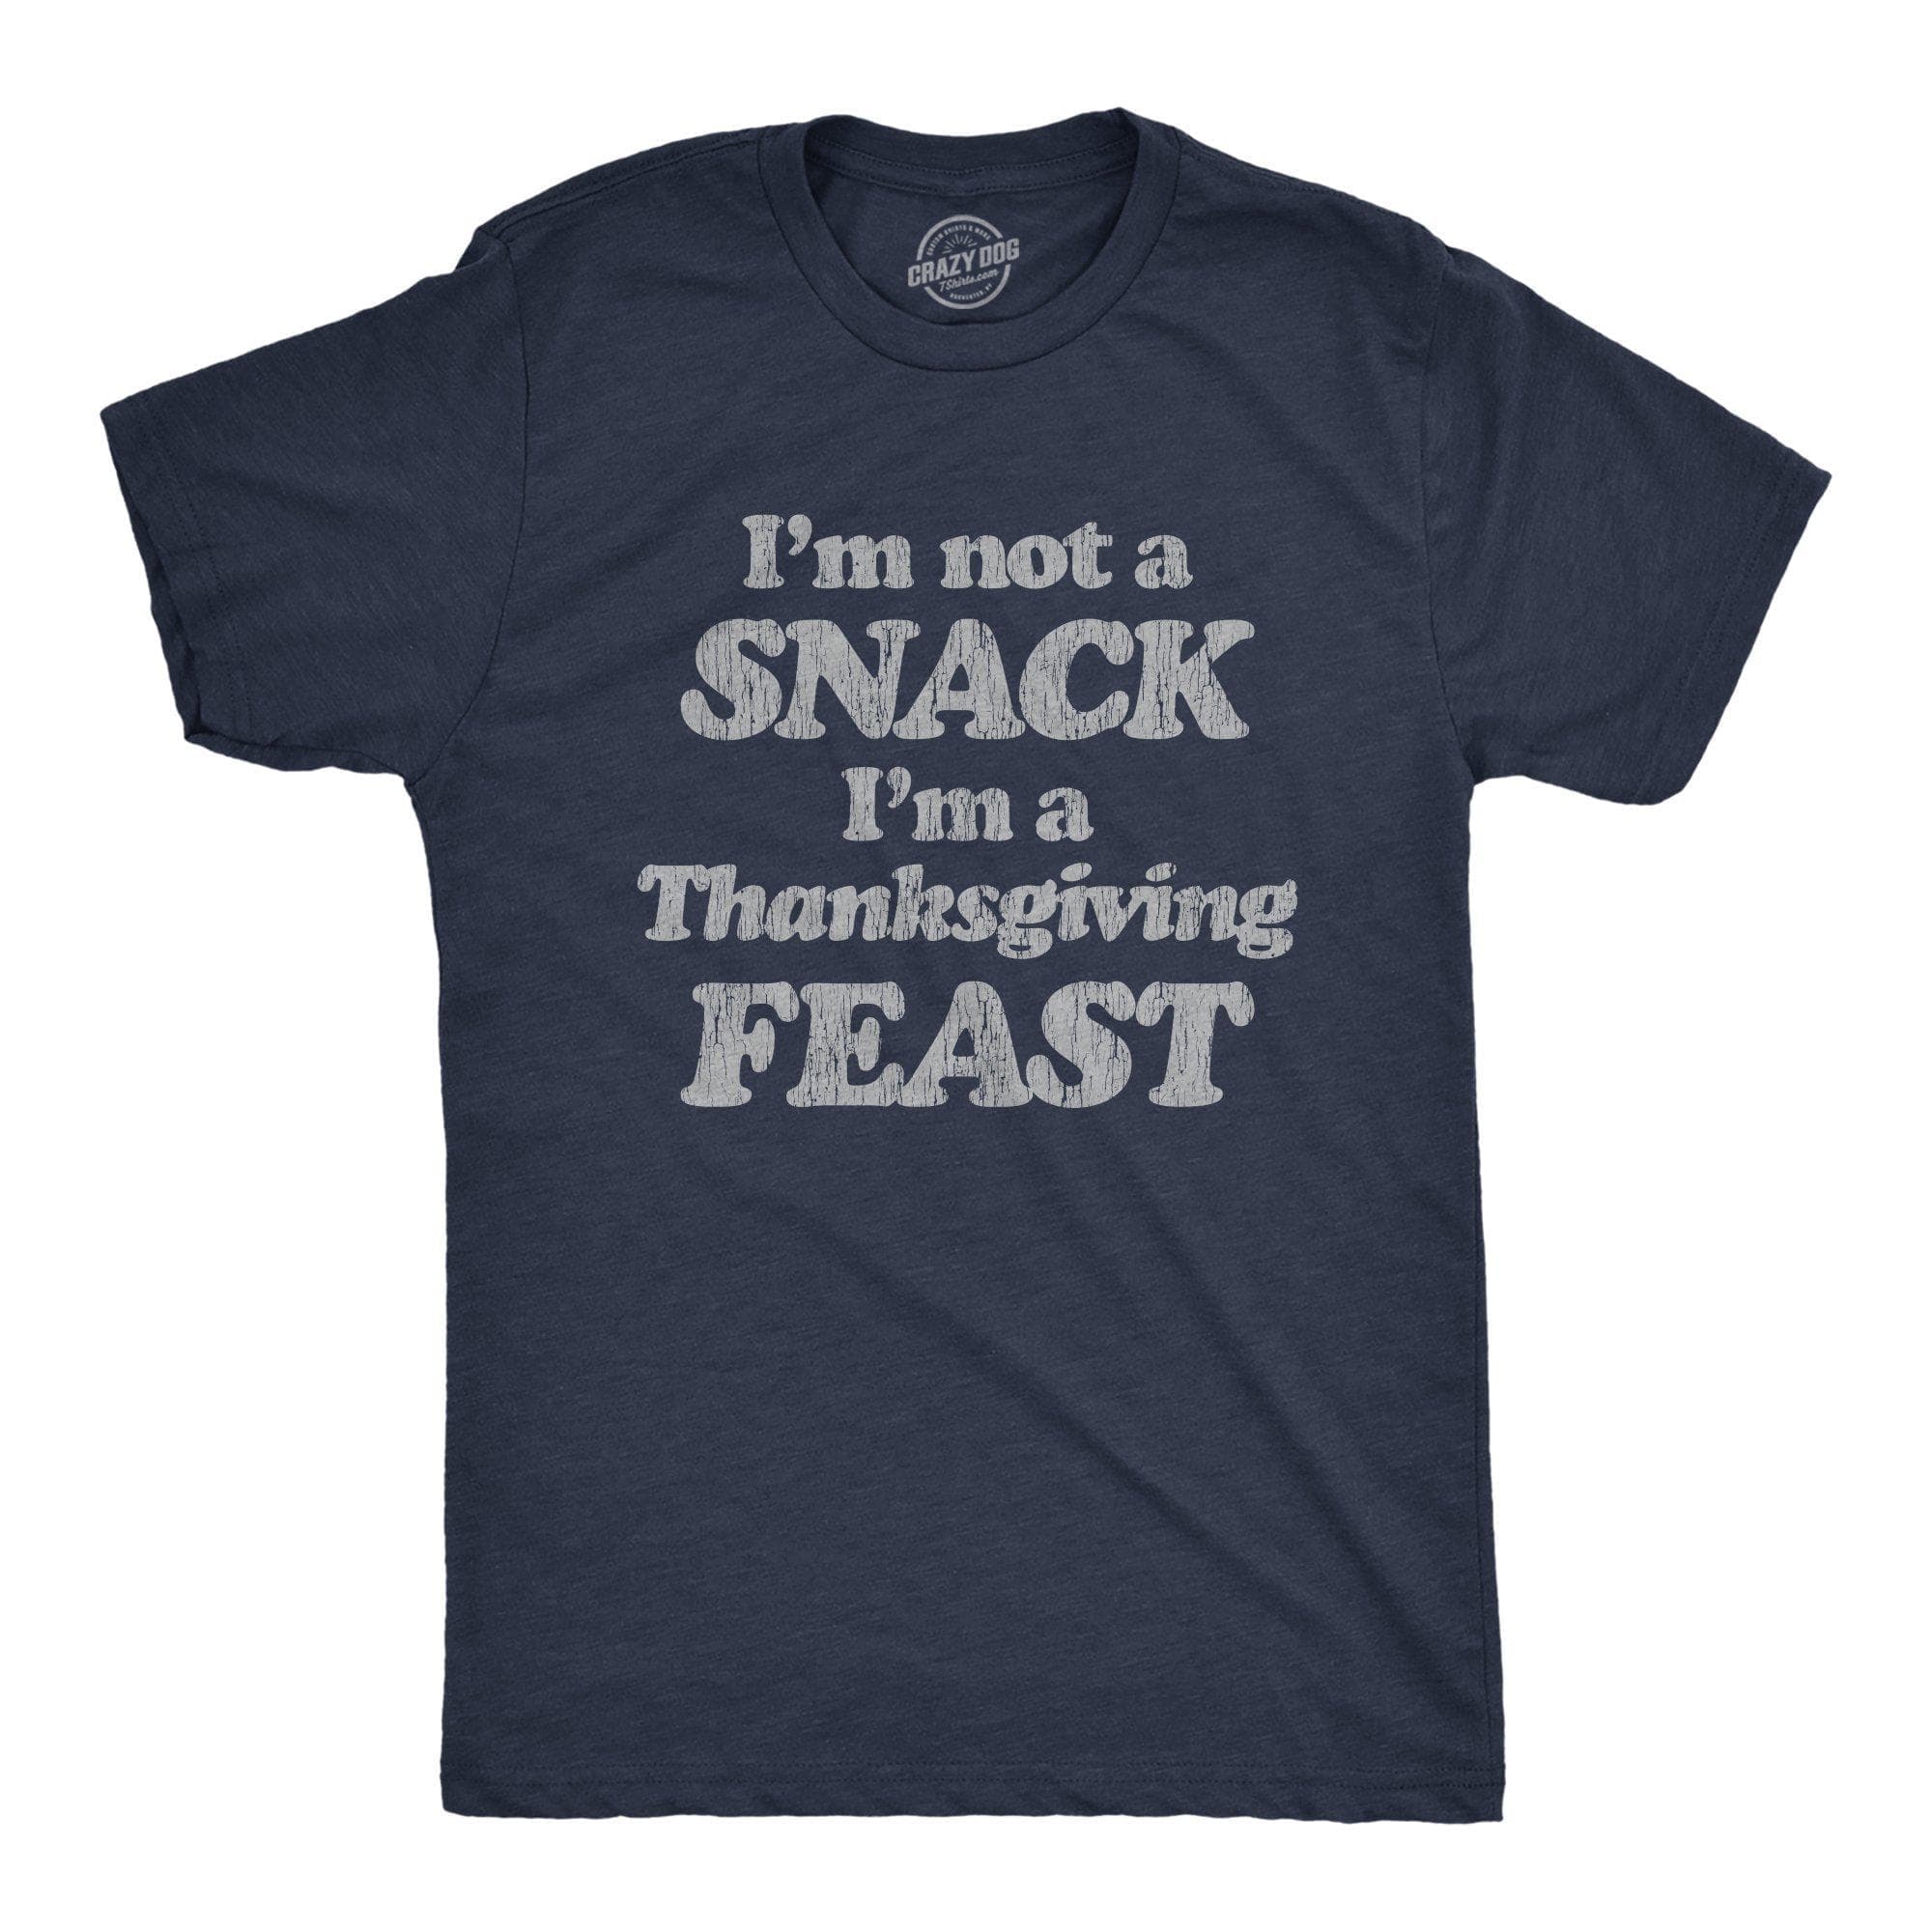 It's Thanksgiving Show Me Your Breasts Men's T Shirt - Crazy Dog T